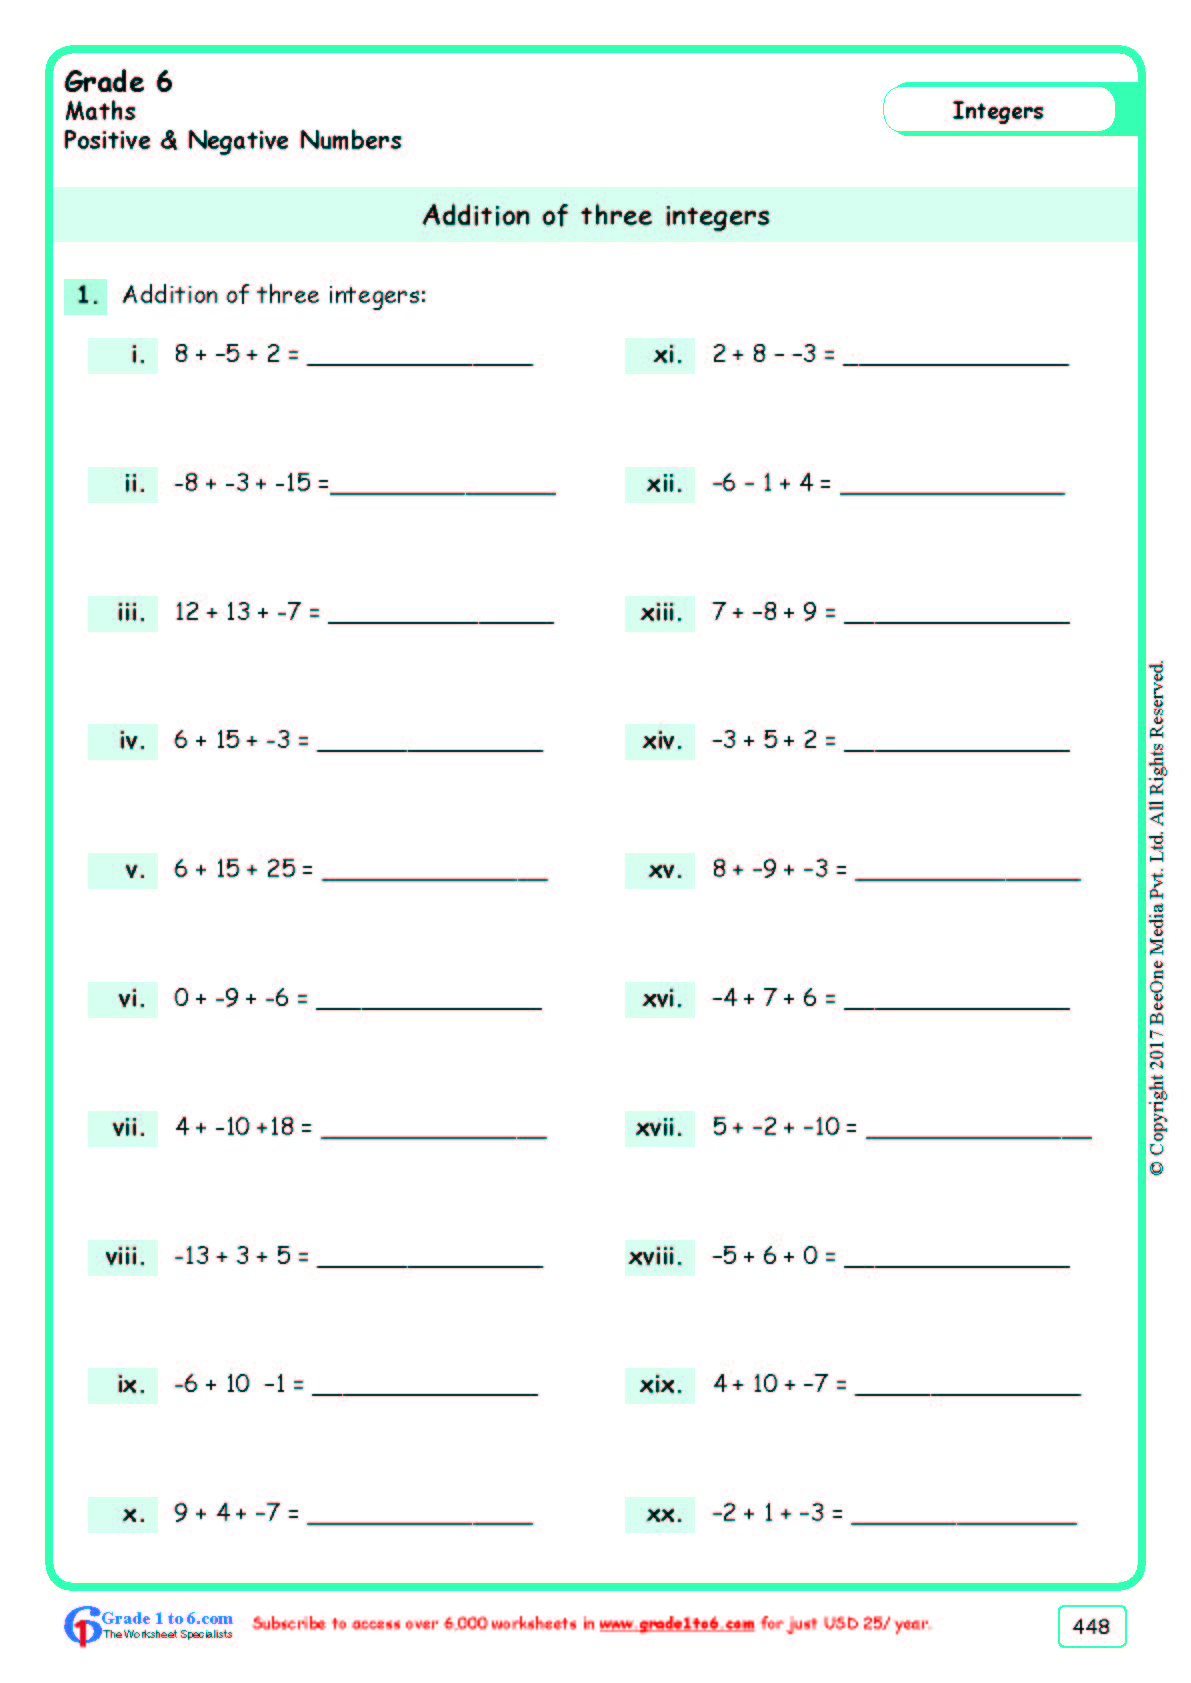 comparing-negative-integers-from-15-to-1-a-integers-worksheet